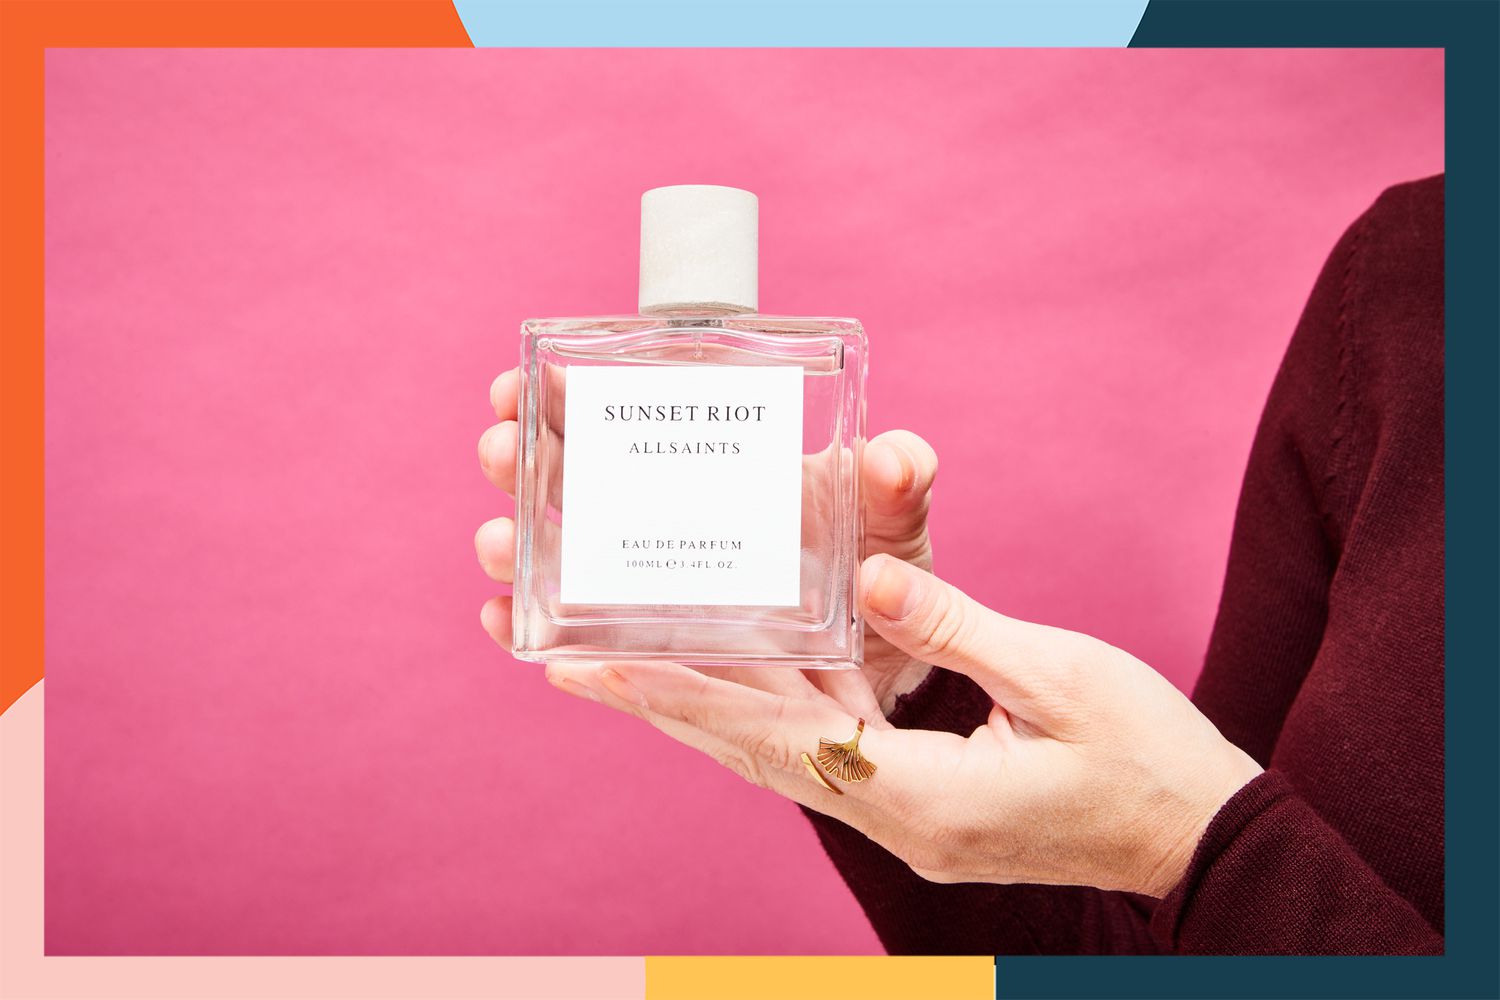 Hands holding the All Saints Sunset Riot Eau de Parfum in front of a pink background.